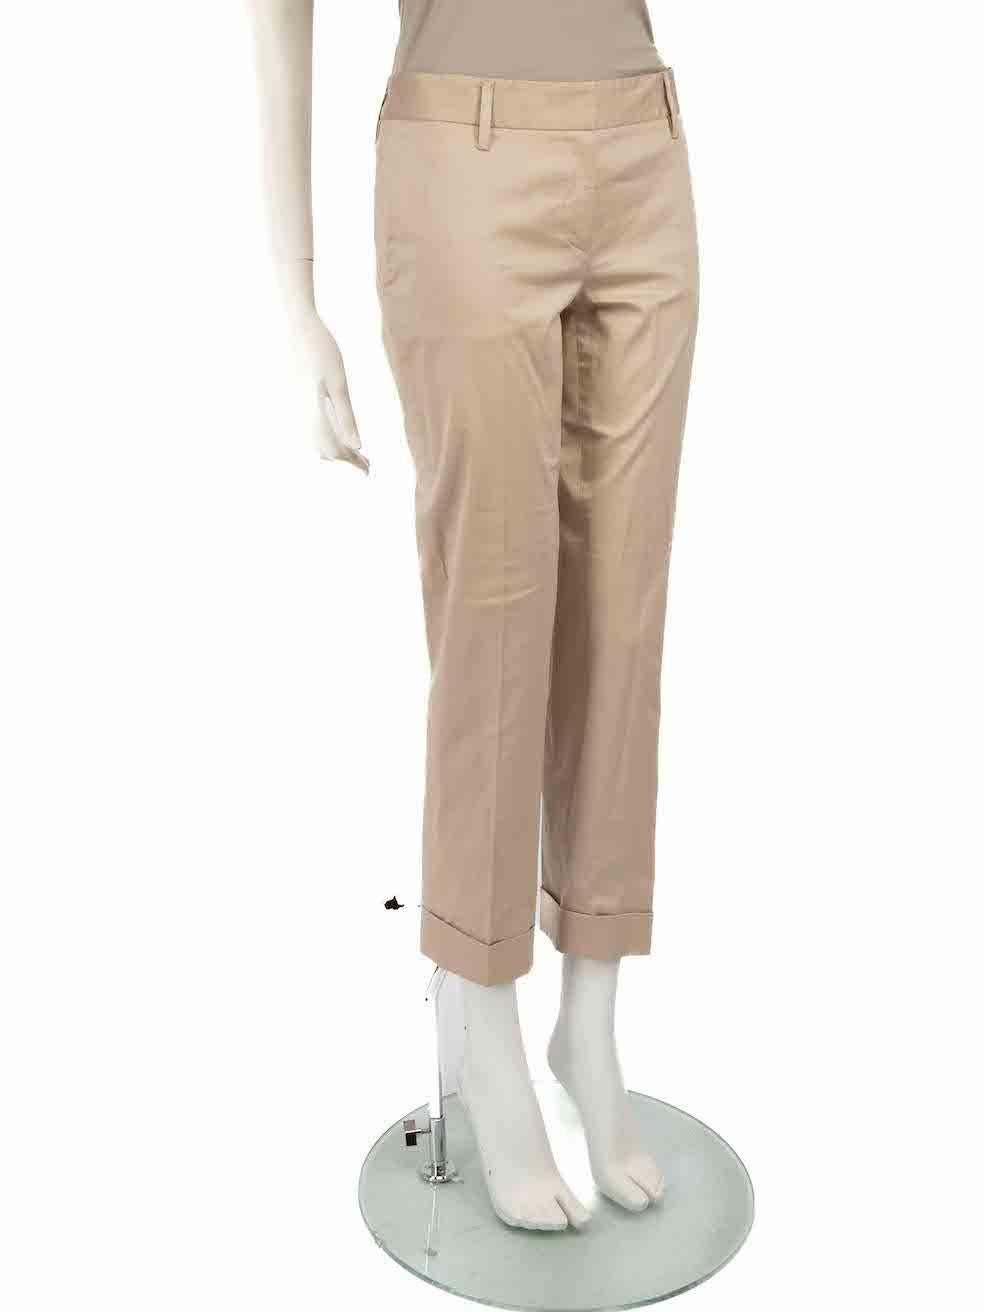 CONDITION is Very good. Hardly any visible wear to trouser is evident on this used Prada designer resale item.
 
 
 
 Details
 
 
 Beige
 
 Cotton
 
 Straight leg trousers
 
 Mid rise
 
 Cropped length
 
 Folded cuffs
 
 Front zip closure with clasp